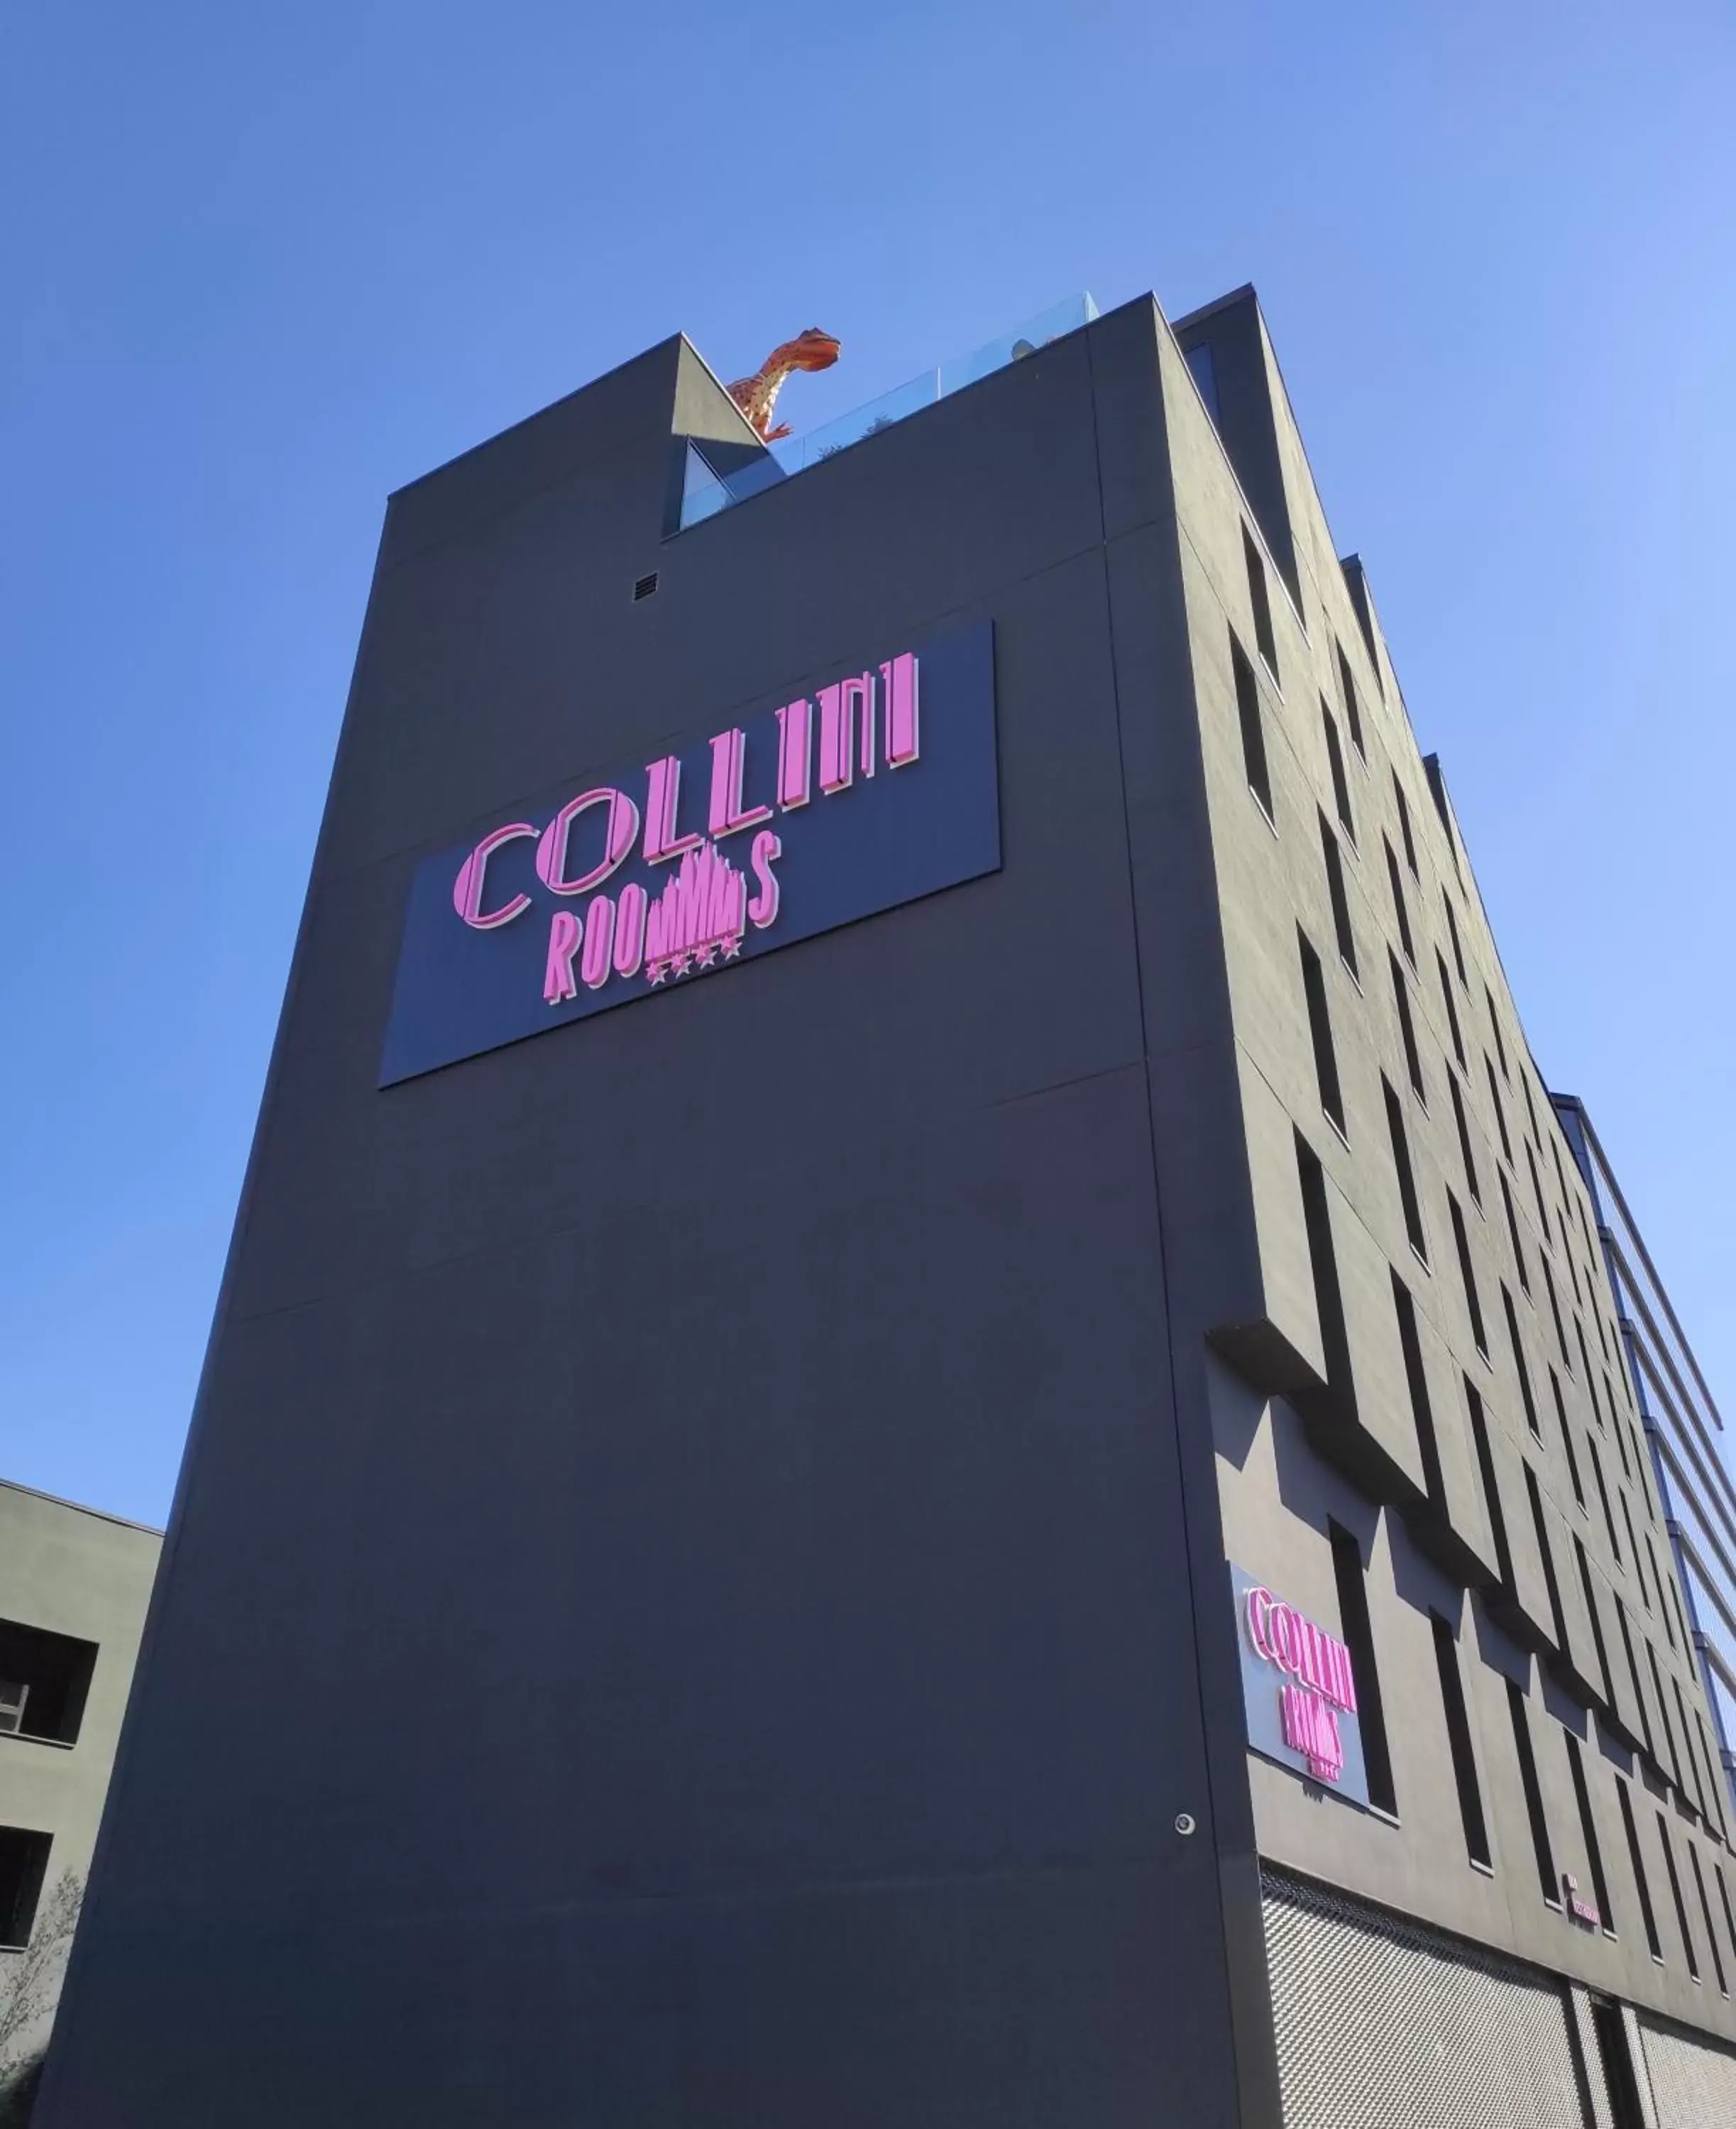 Property building in Collini Rooms